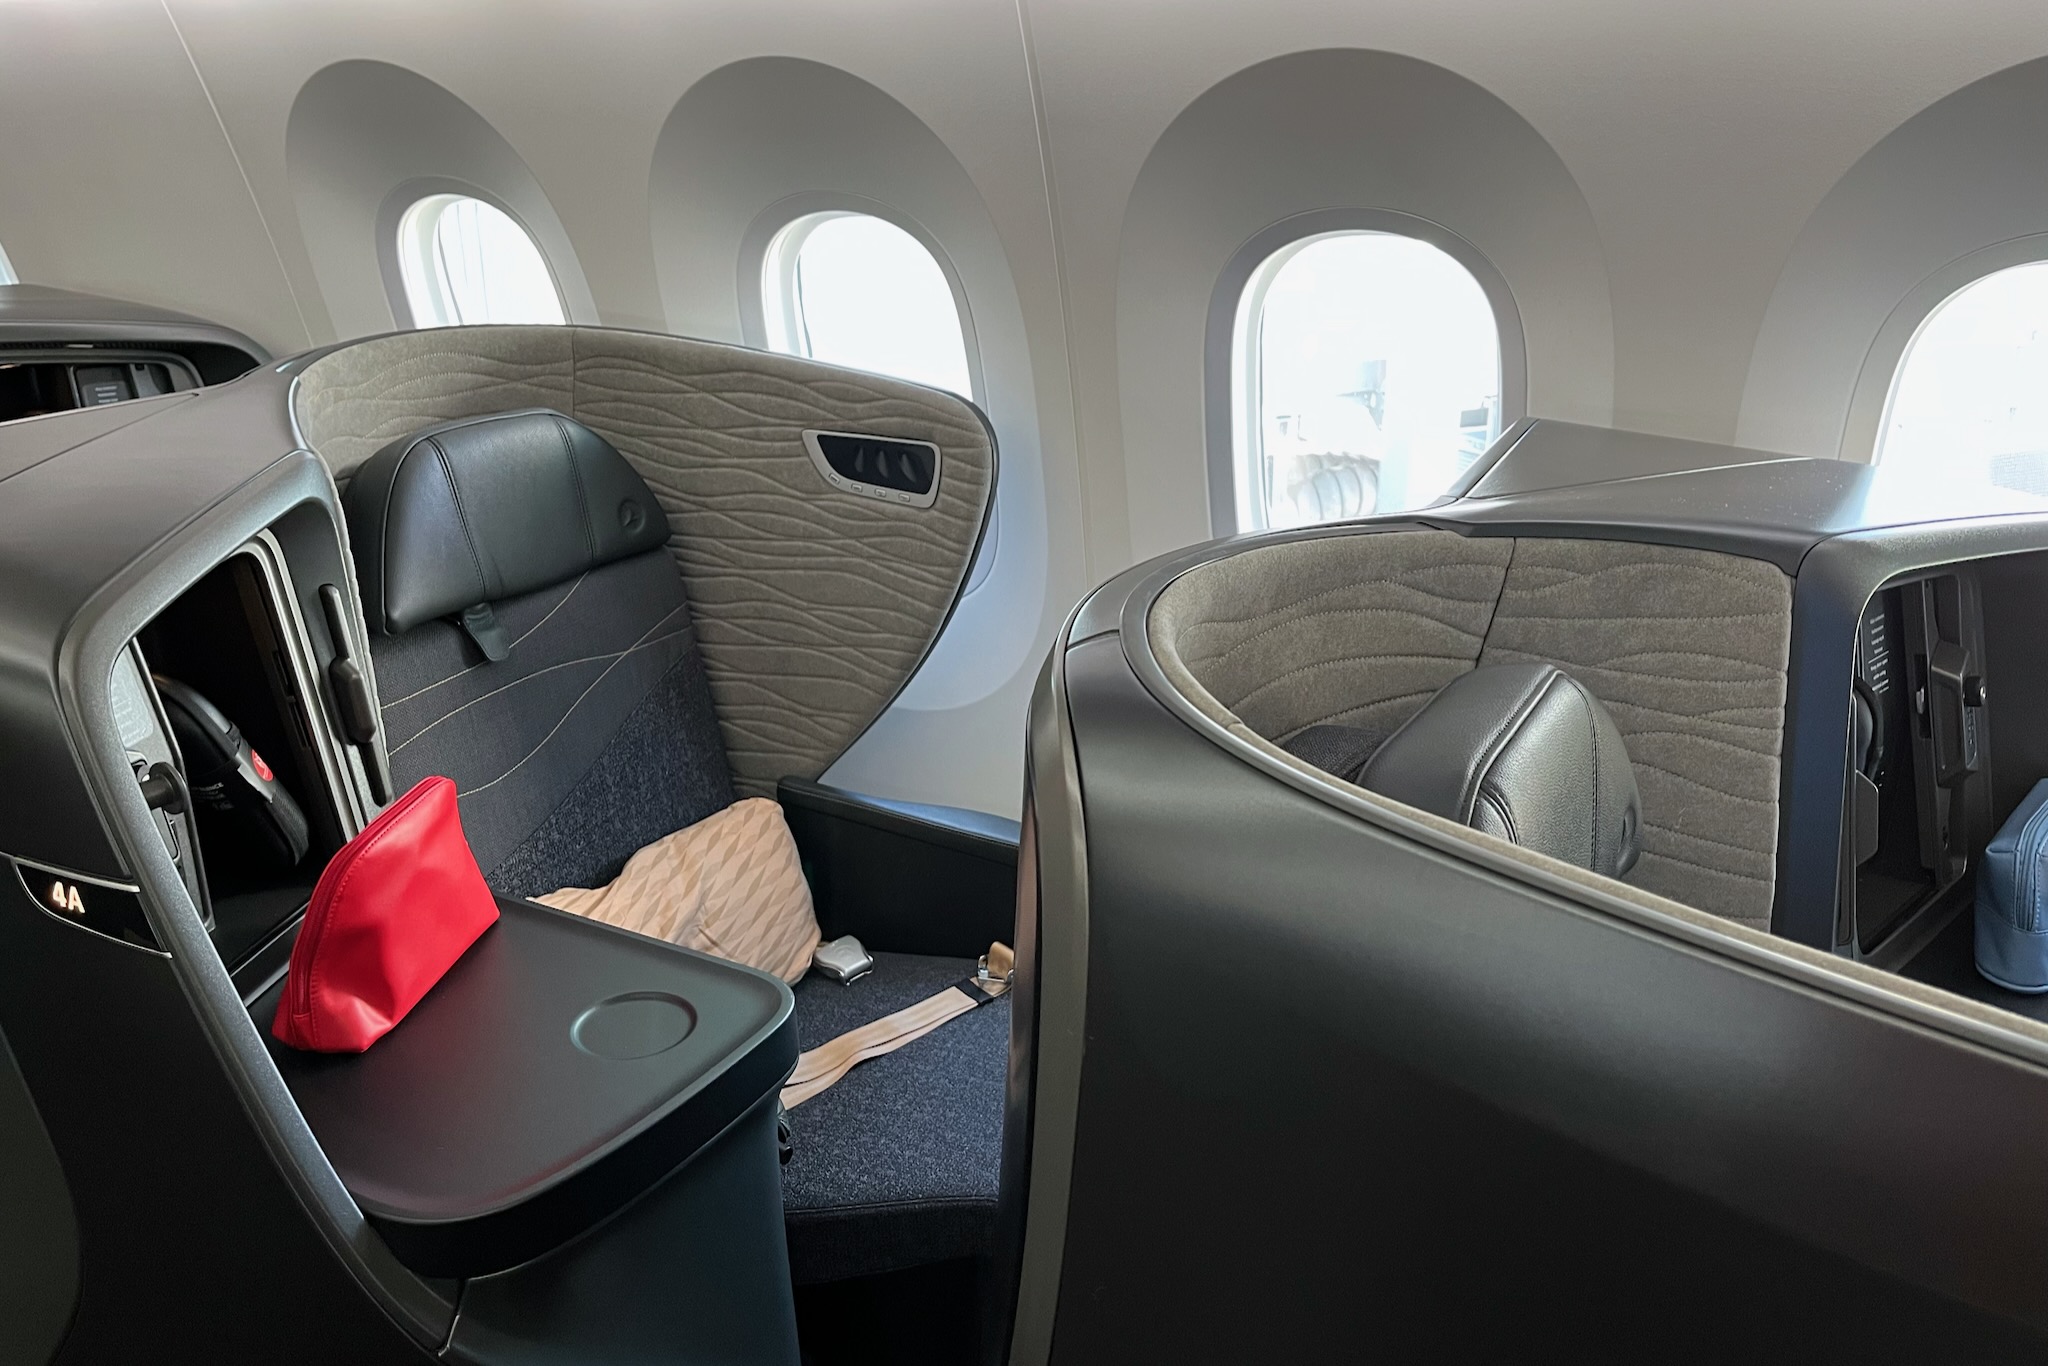 Turkish Airlines Business Class Boeing 787-9